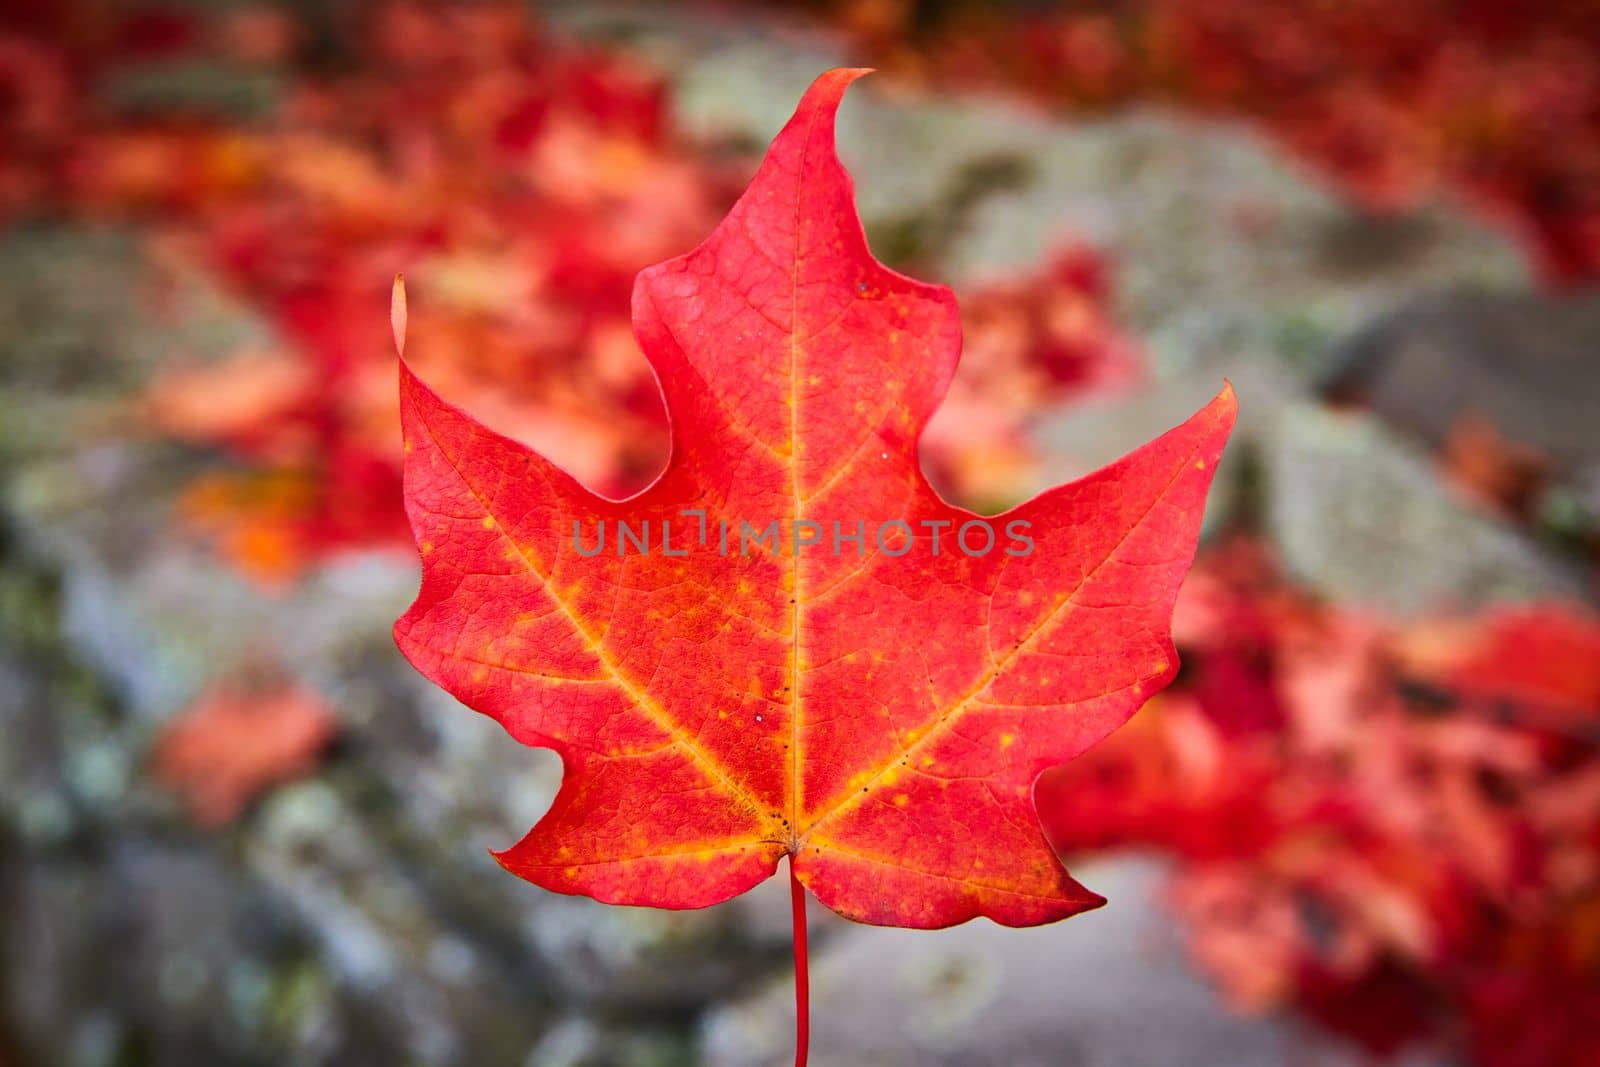 Image of Focus on single perfect red fall leaf in center with grey and red soft background